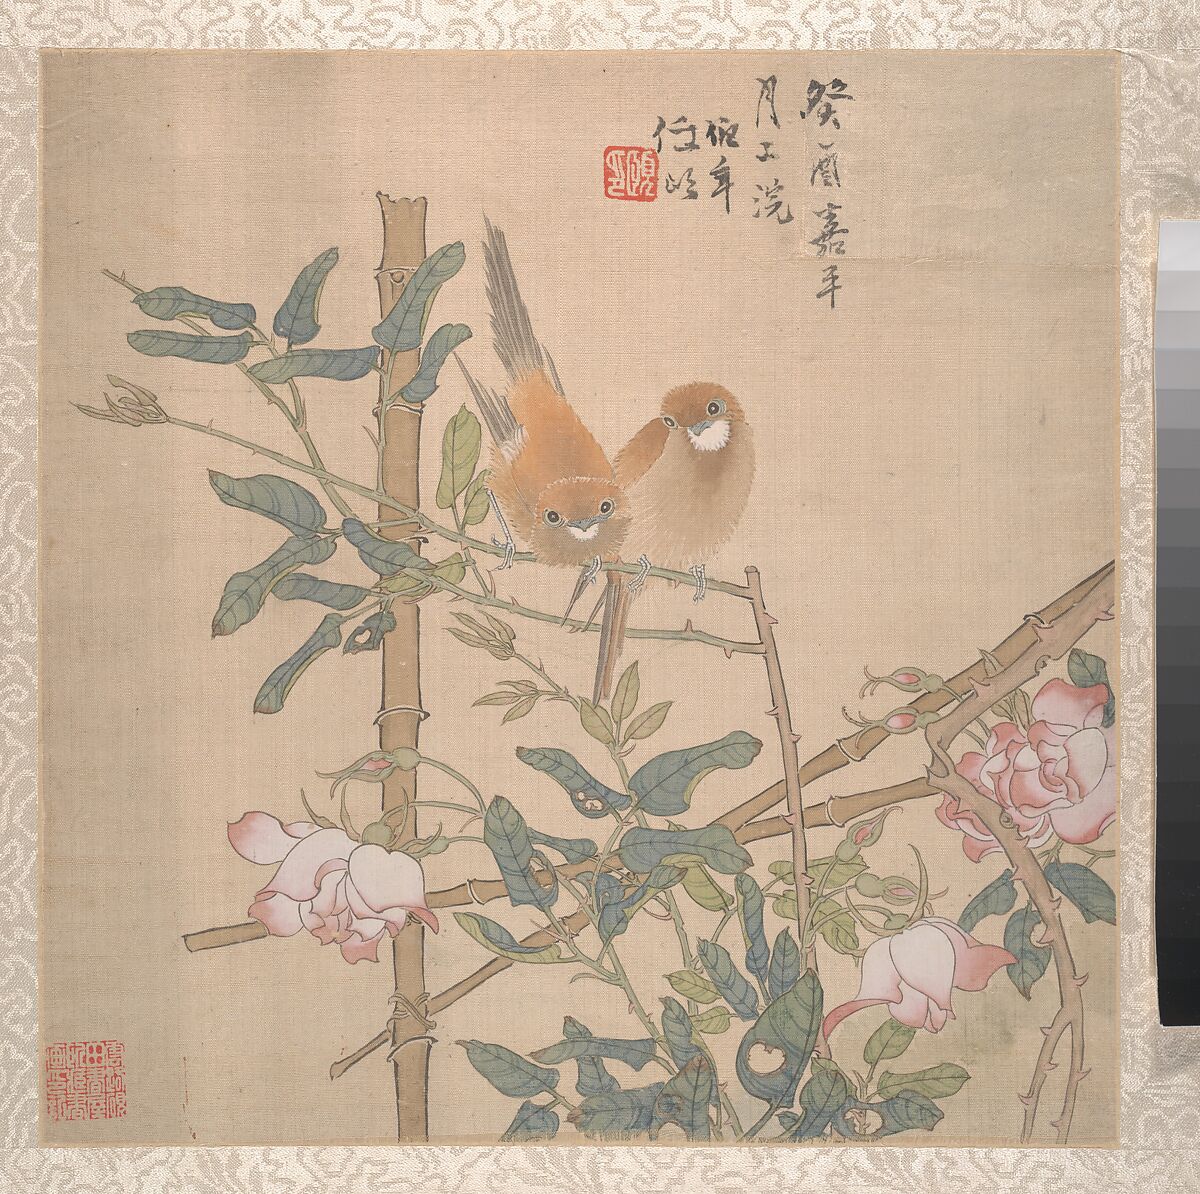 Two Birds Perched on a Flowering Rose Bush, Ren Yi (Ren Bonian) (Chinese, 1840–1896), Album leaf; ink and color on paper, China 